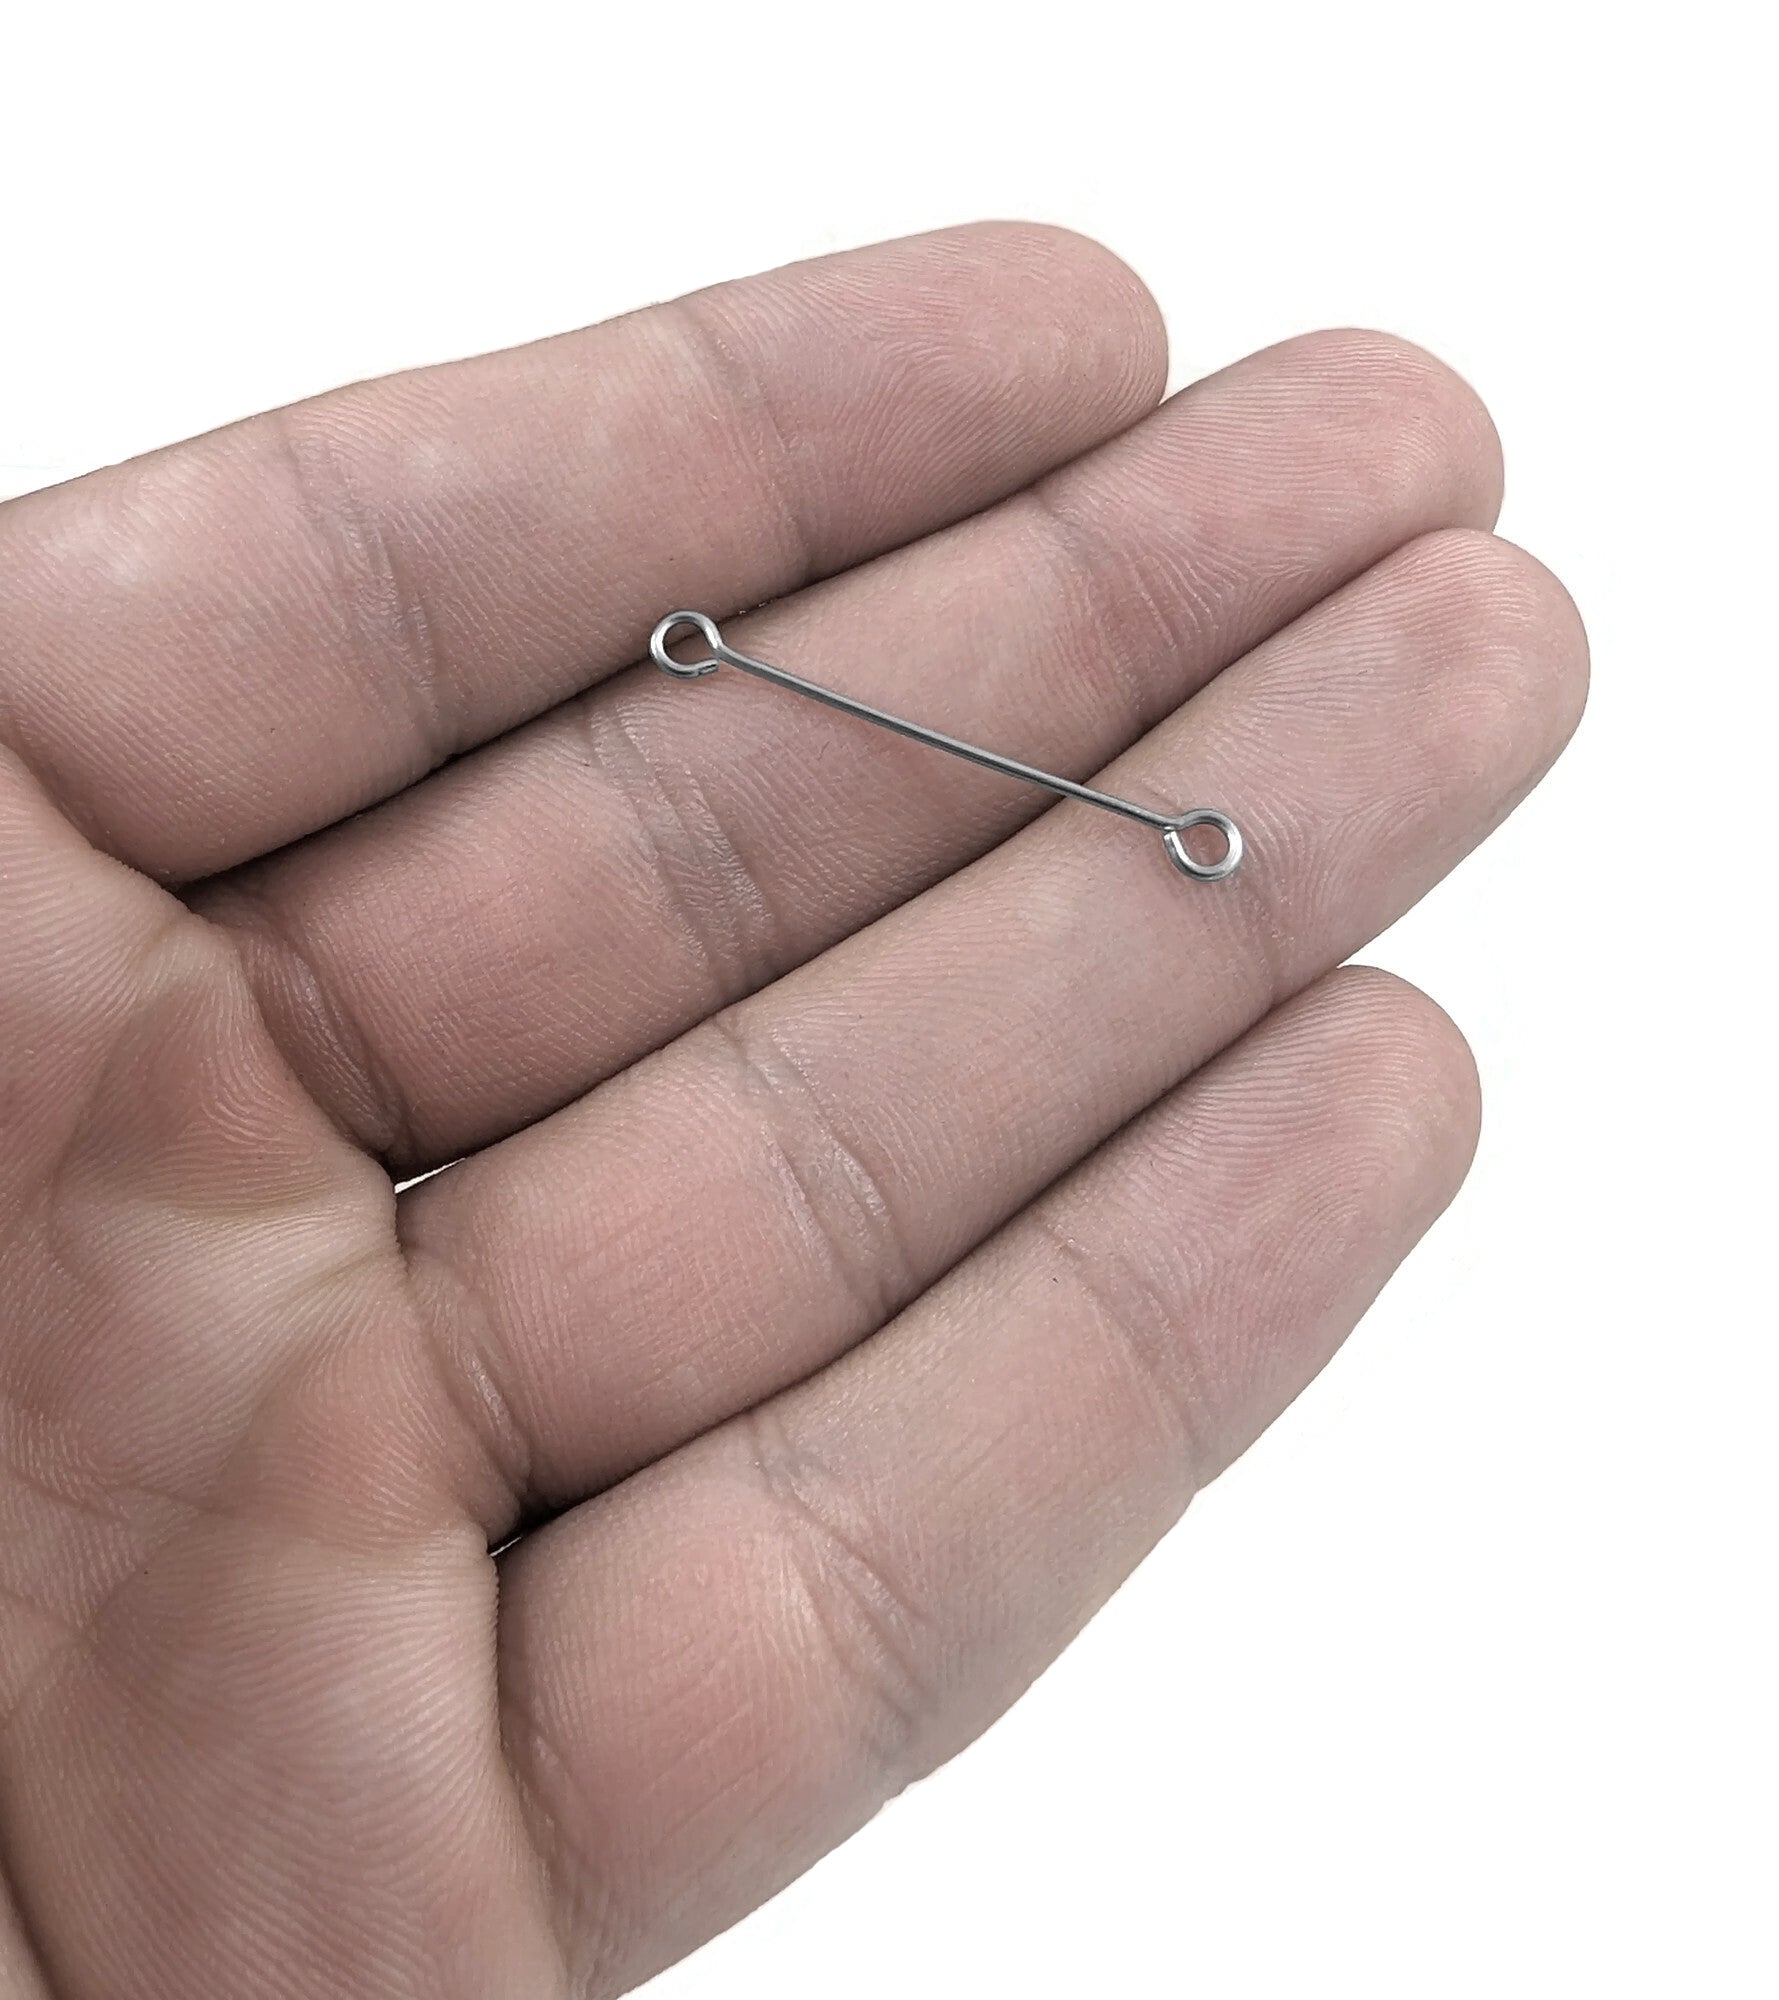 50 Stainless steel double sided eyepins - 19, 21 or 30mm - Hypoallergenic jewelry findings